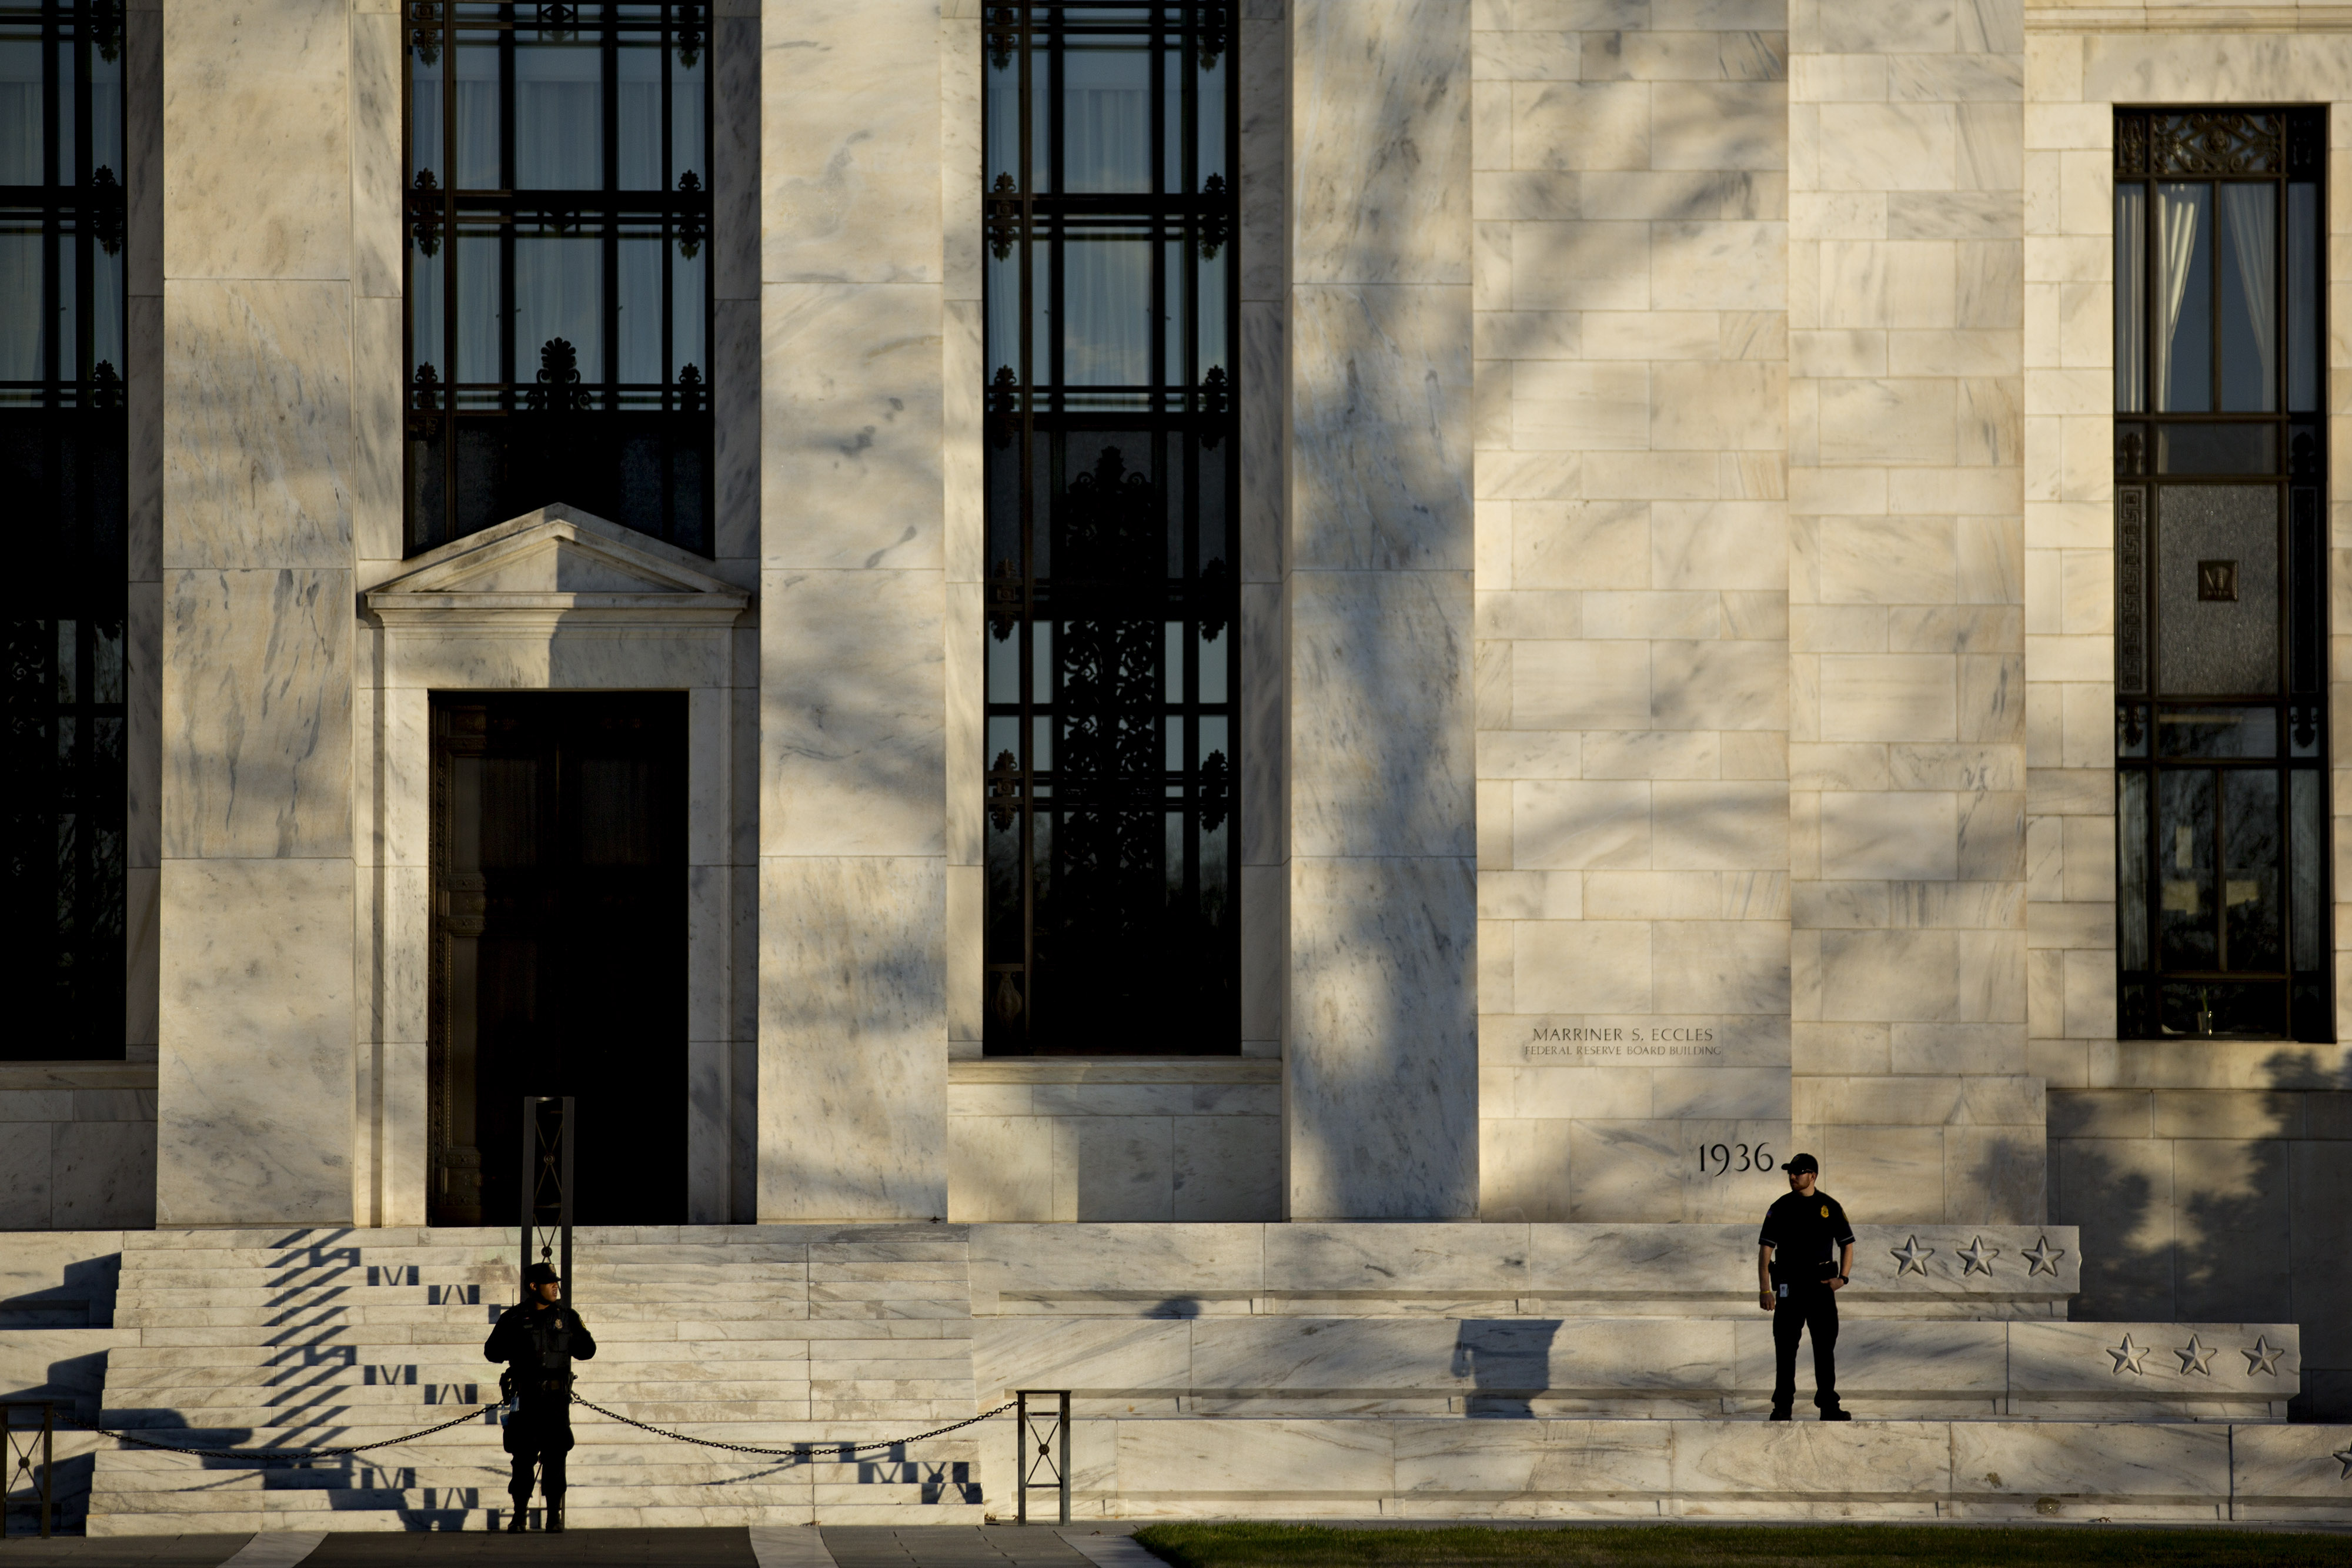 Federal Reserve police officers stand in front of the Marriner S. Eccles Federal Reserve building in Washington, D.C., on Dec. 15, 2015. (Andrew Harrer—Bloomberg/Getty Images)